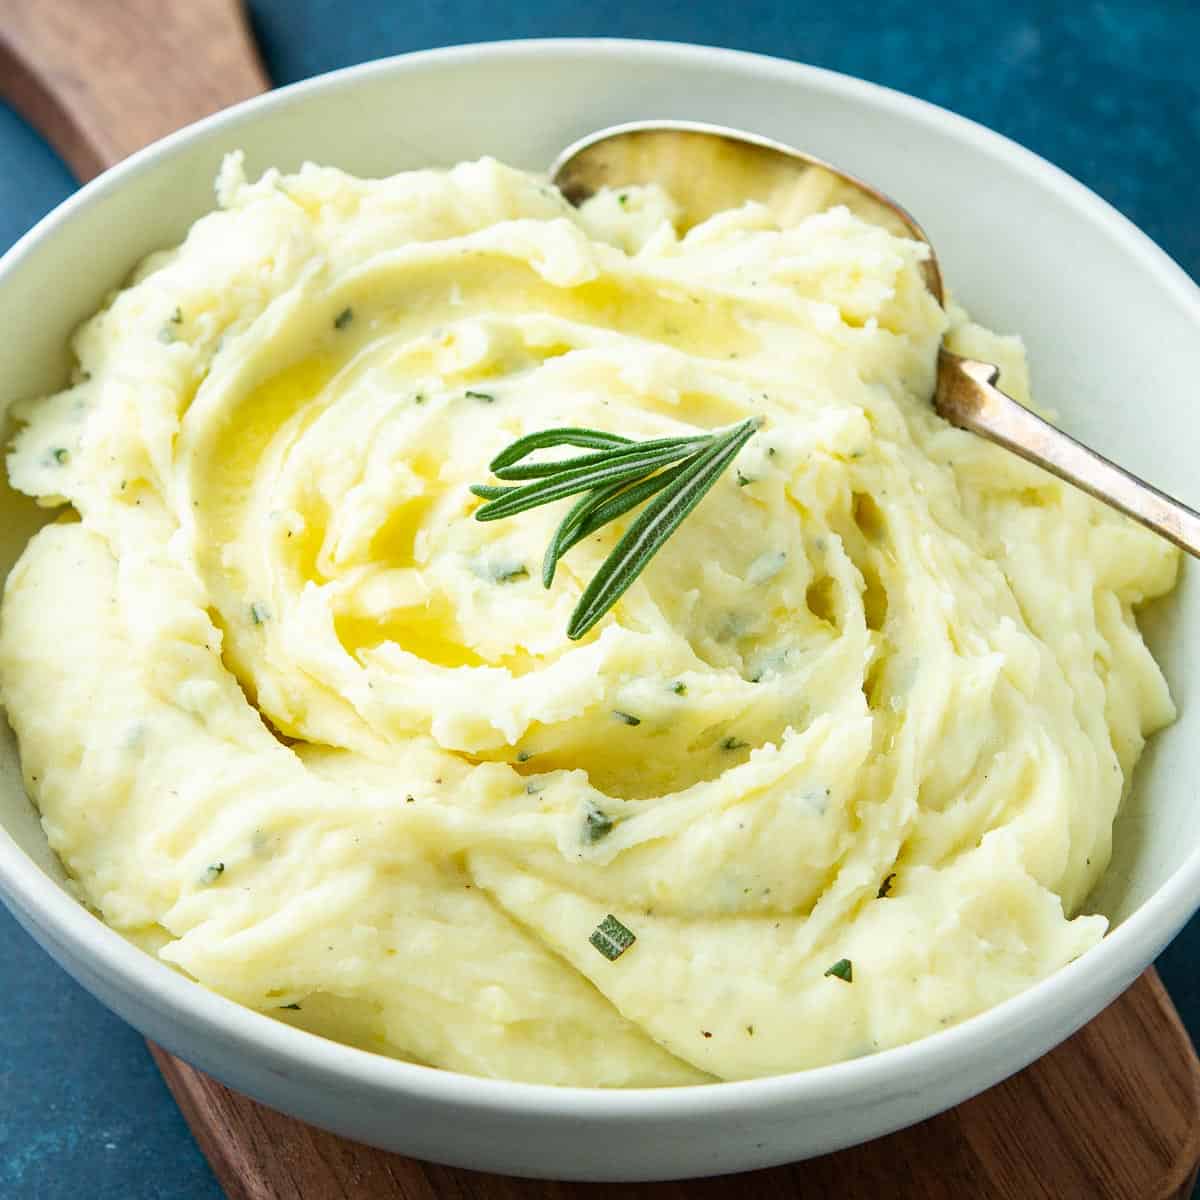 Mashed potatoes with rosemary in a white bowl on a wooden cutting board.